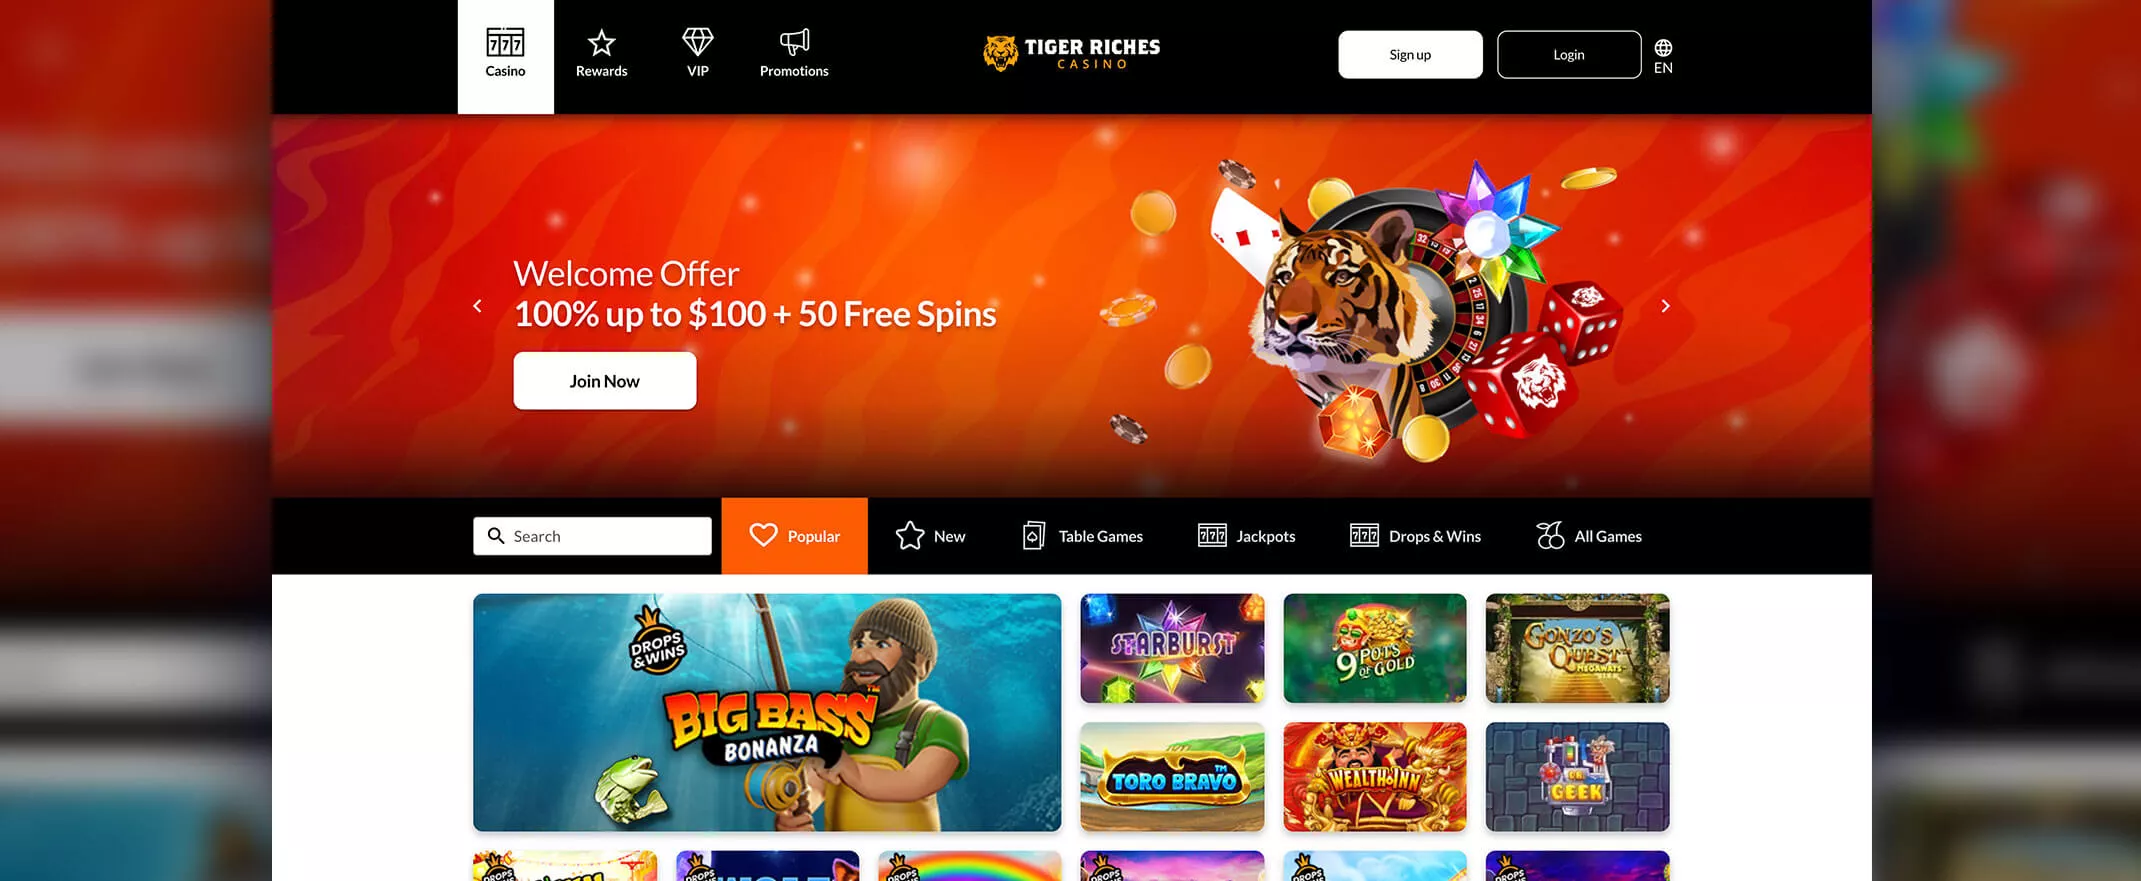 Tiger Riches screenshot of the homepage